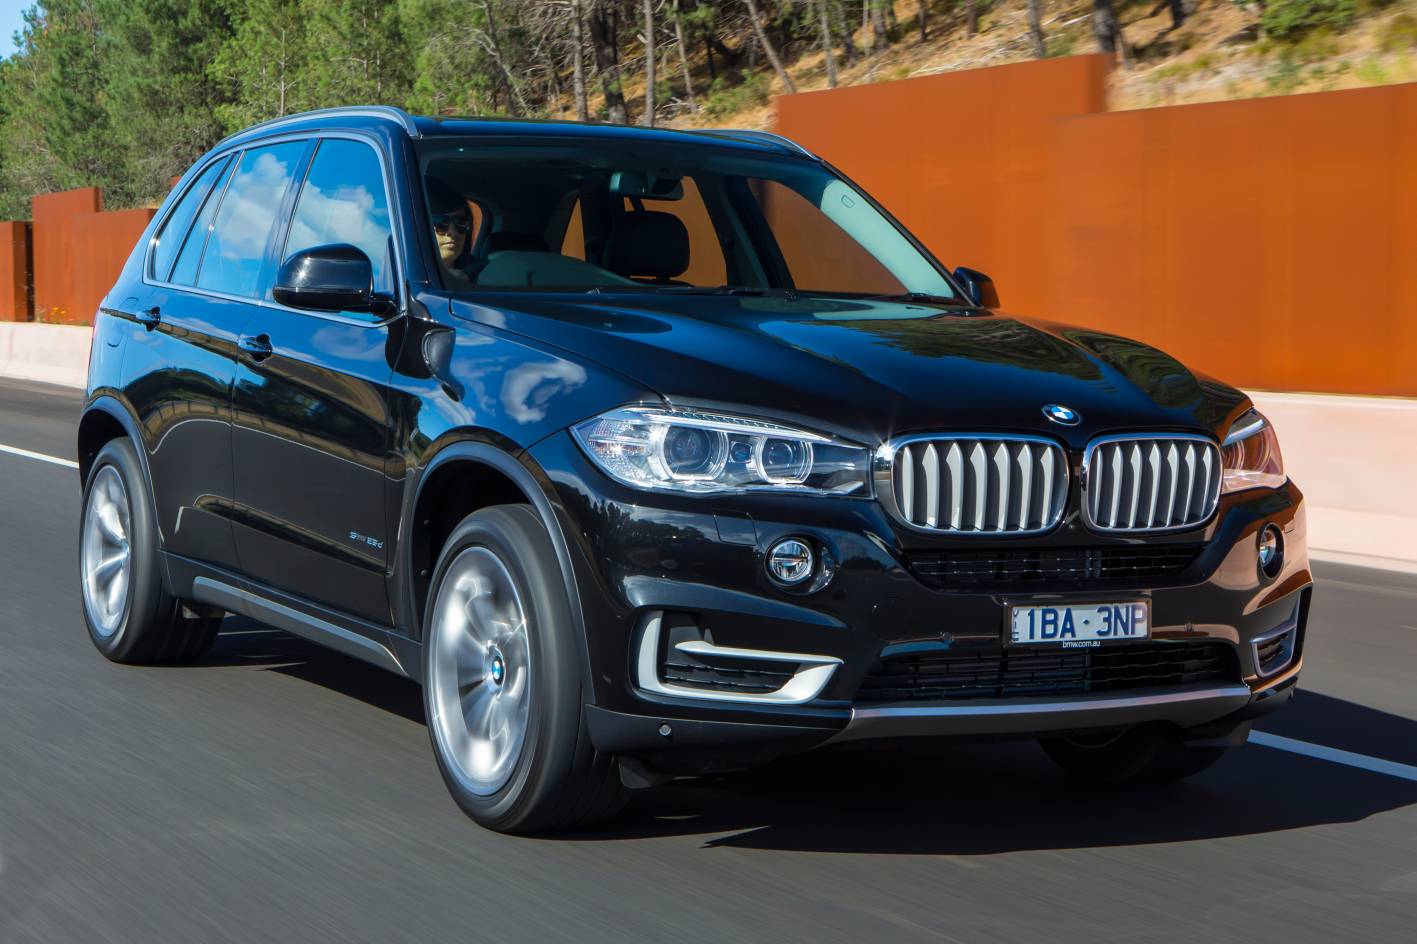 BMW making major product announcement, new X7 likely